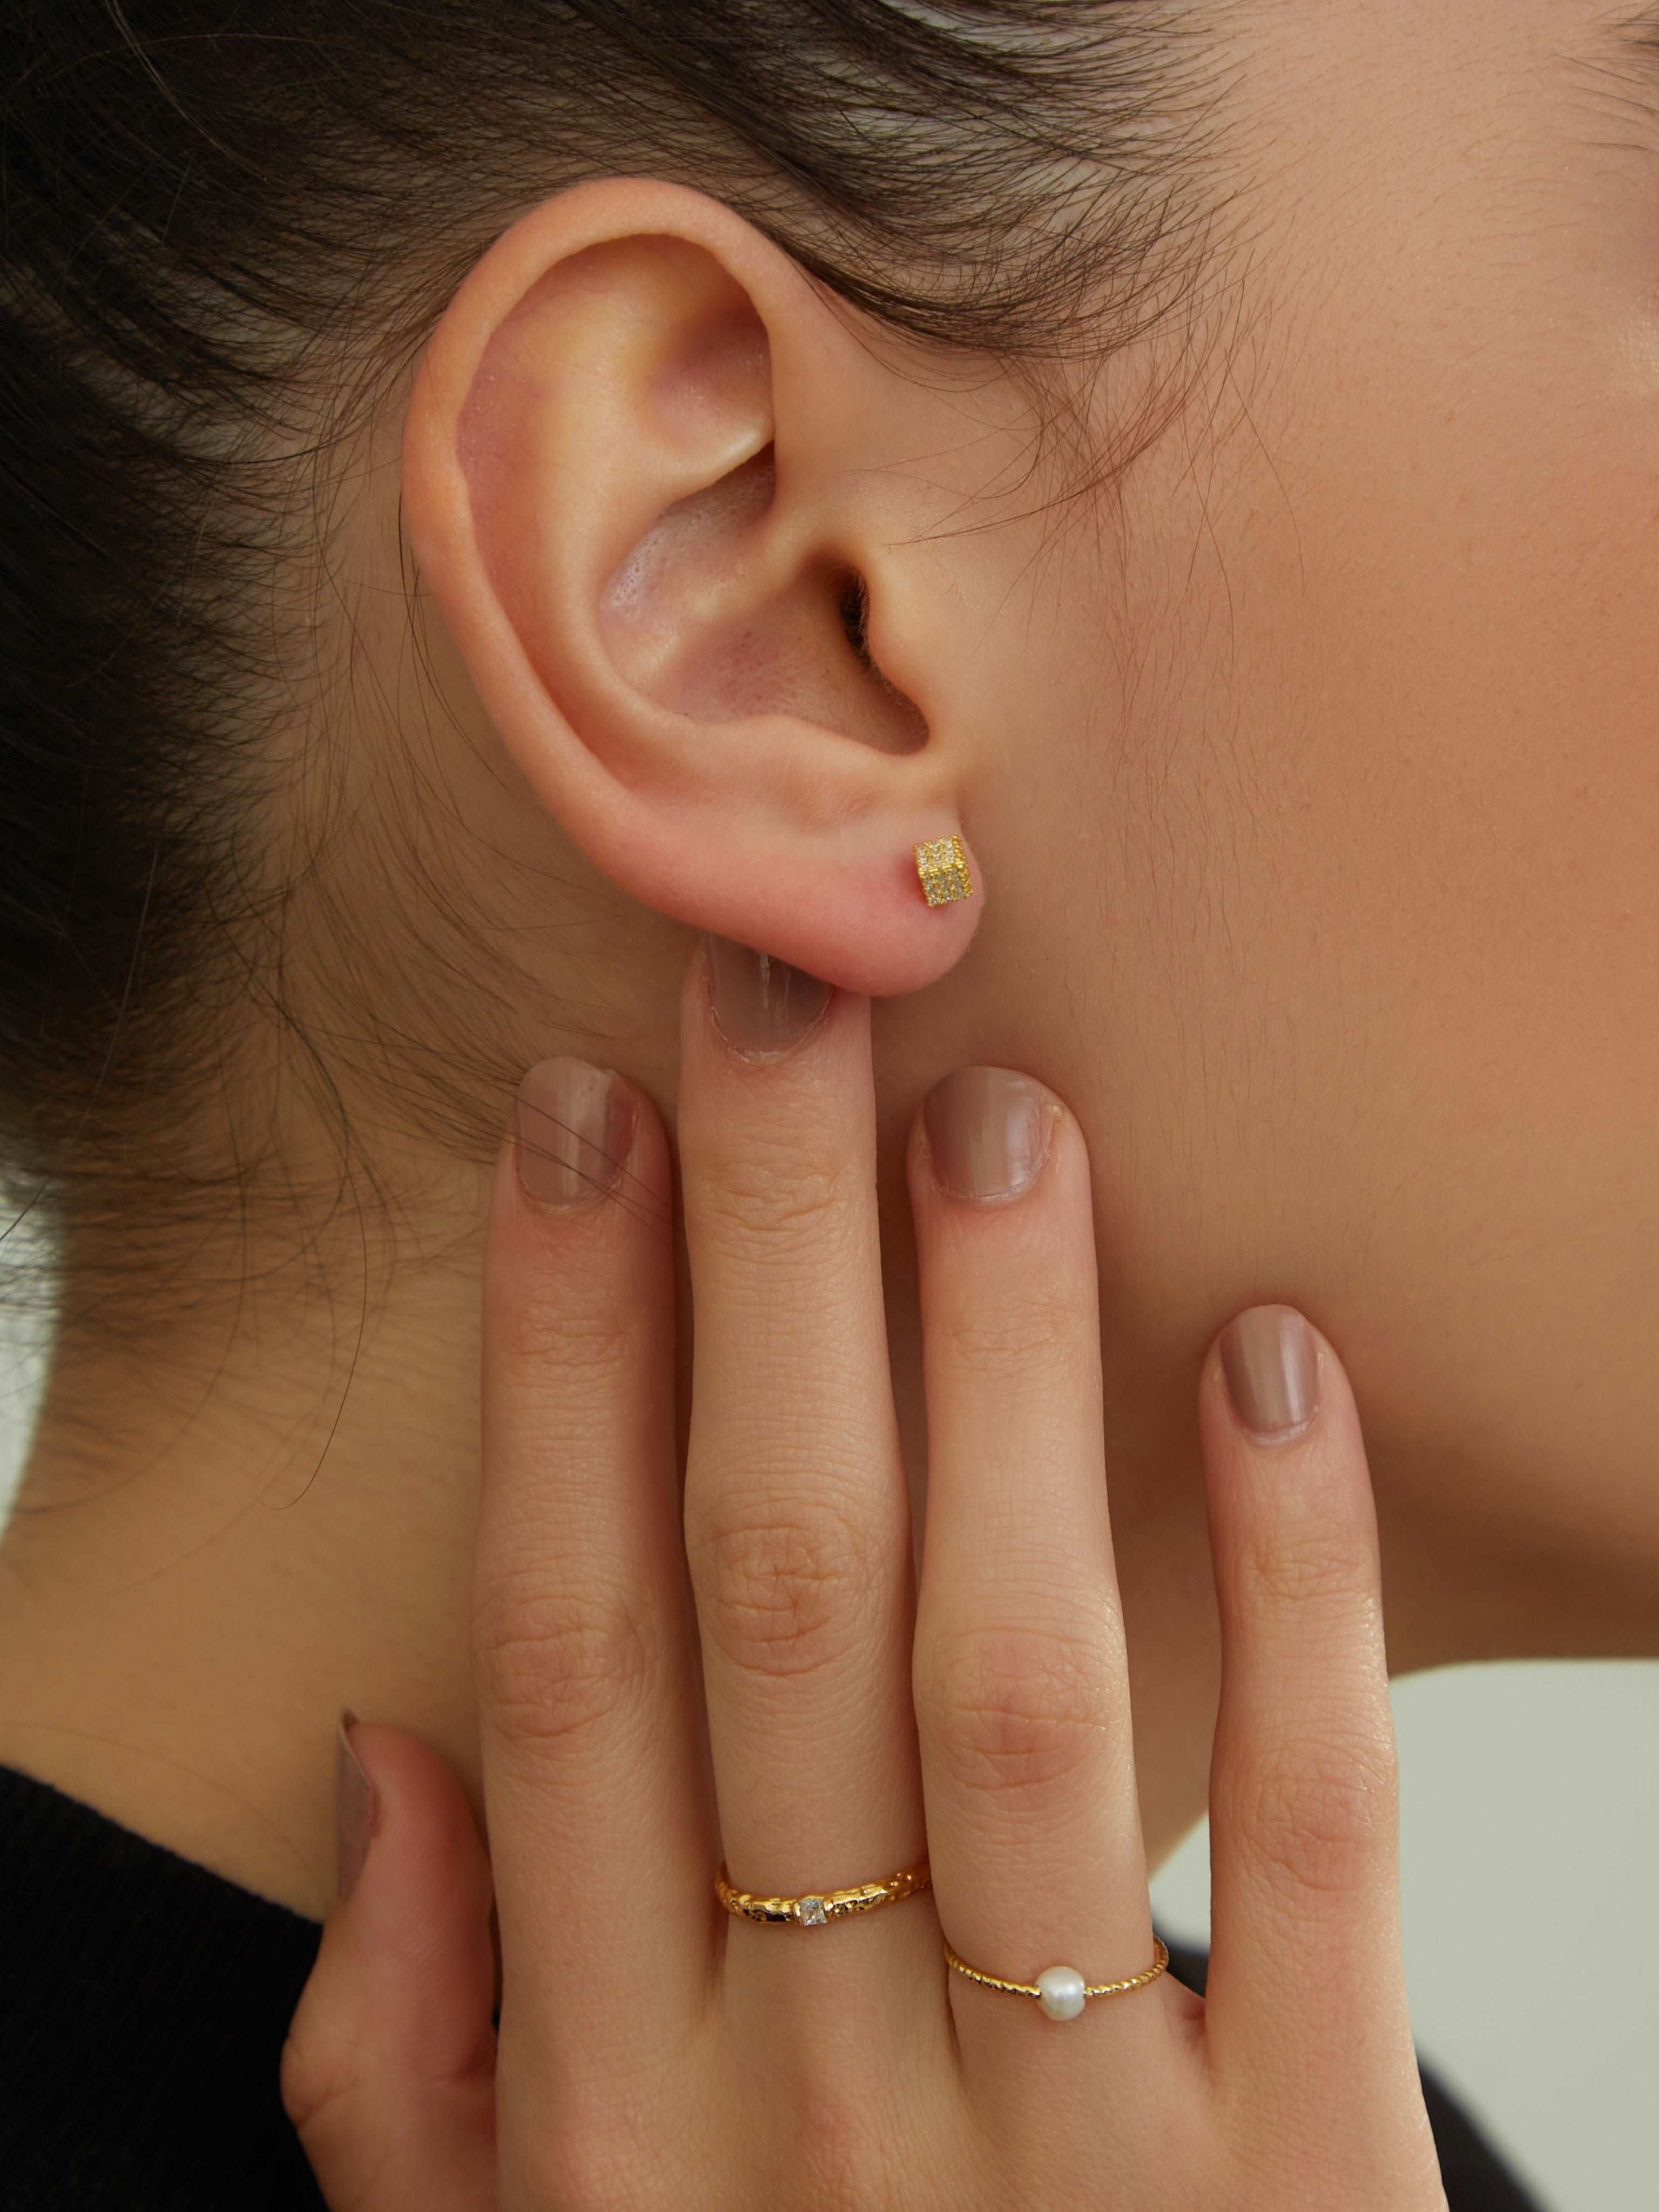 wearing Silver Cube Studs Earrings, thin gold ring and single pearl ring